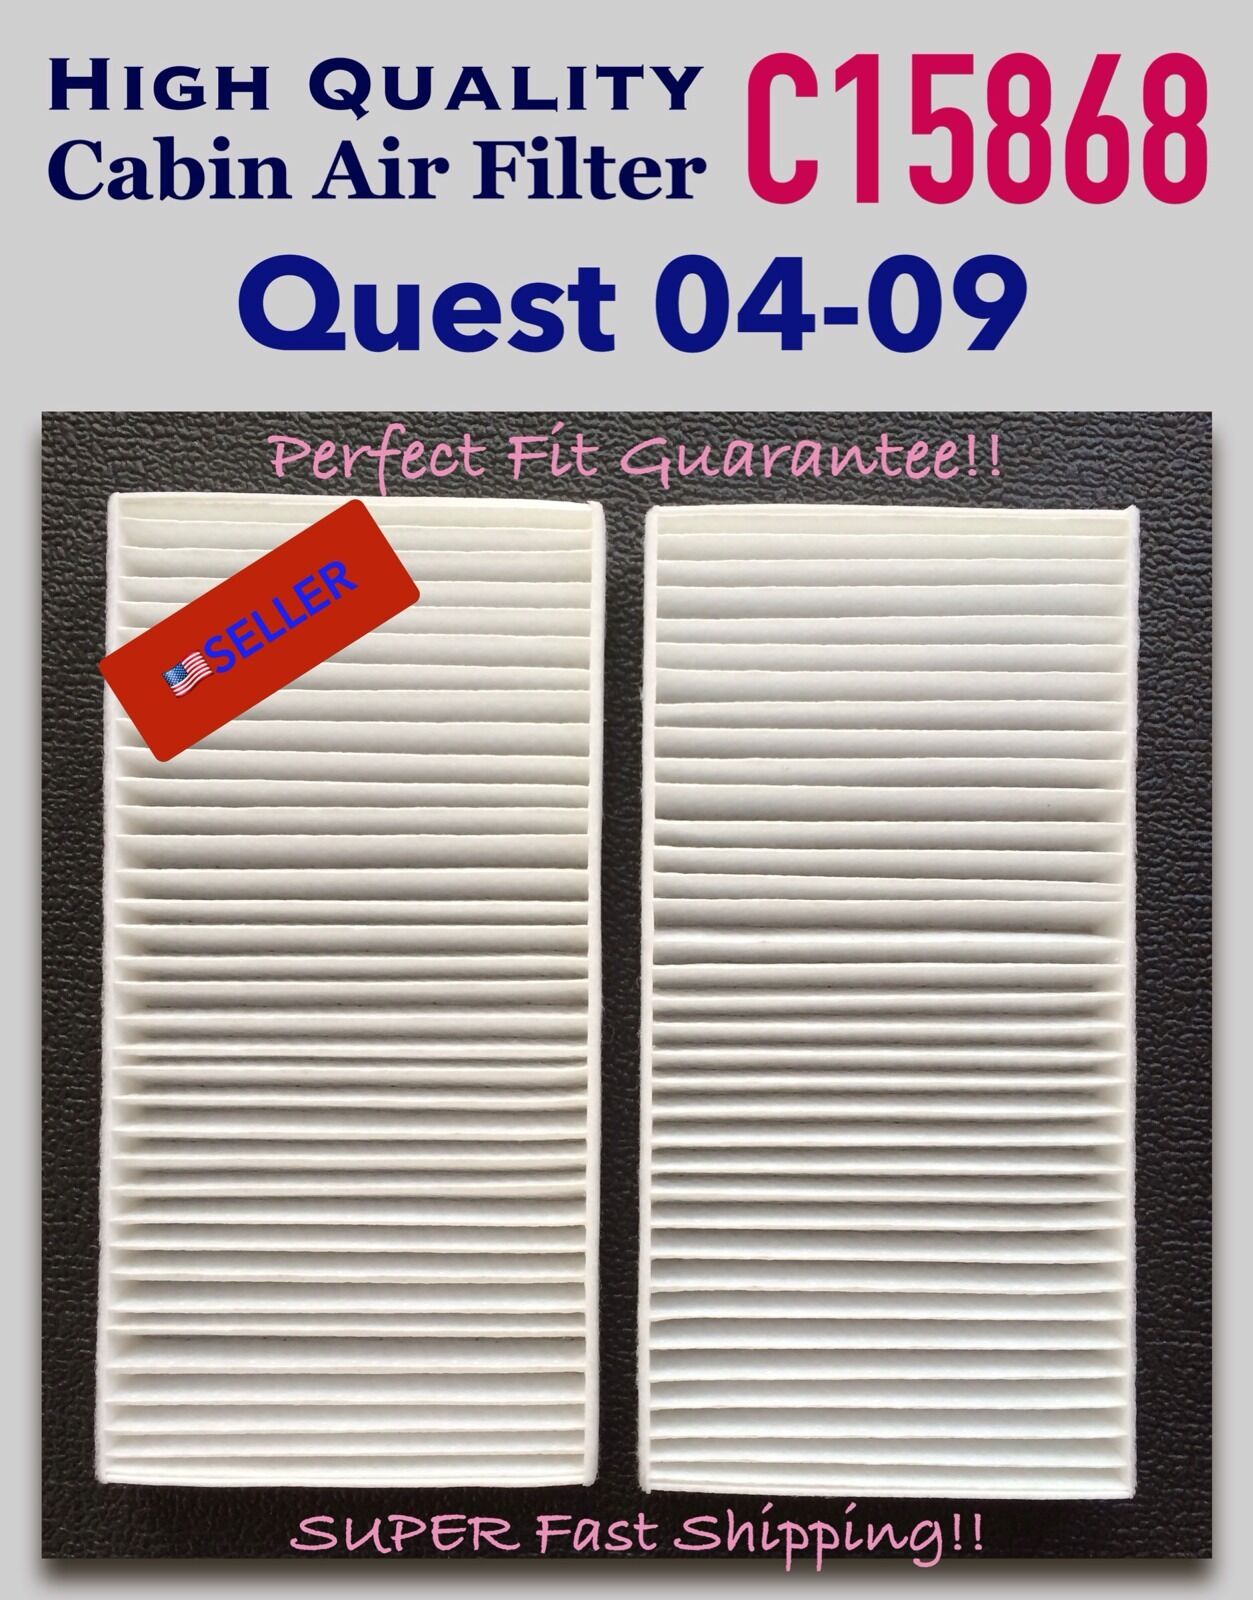 Quest 04 05 06 07 08 09 High Quality CABIN AIR FILTER C15868 A+++ Perfect Fit